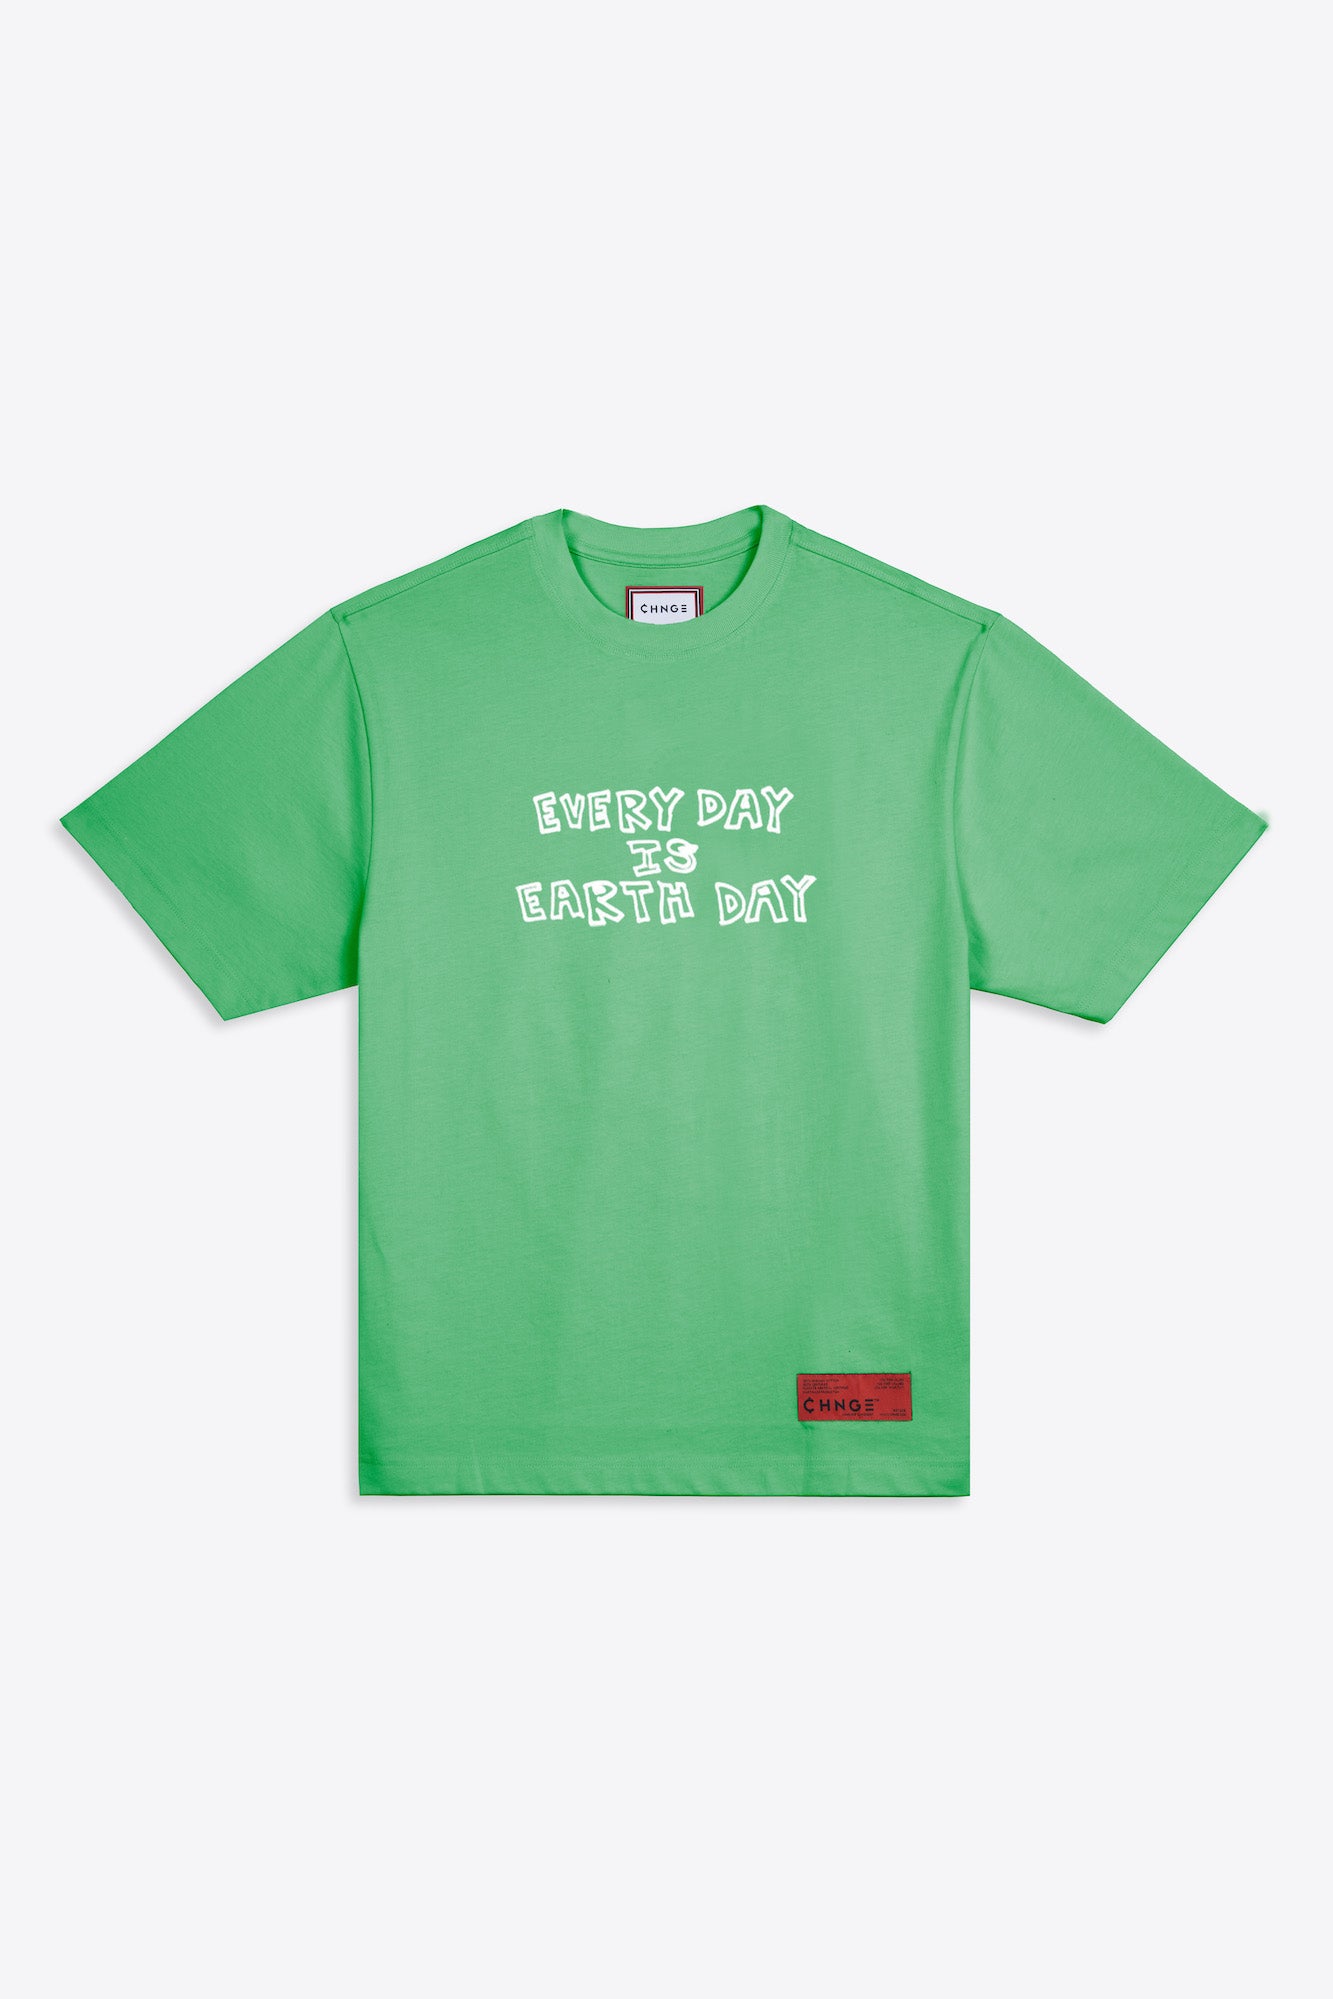 Every Day Earth Day S/S T-Shirt (Kelly Green) $42